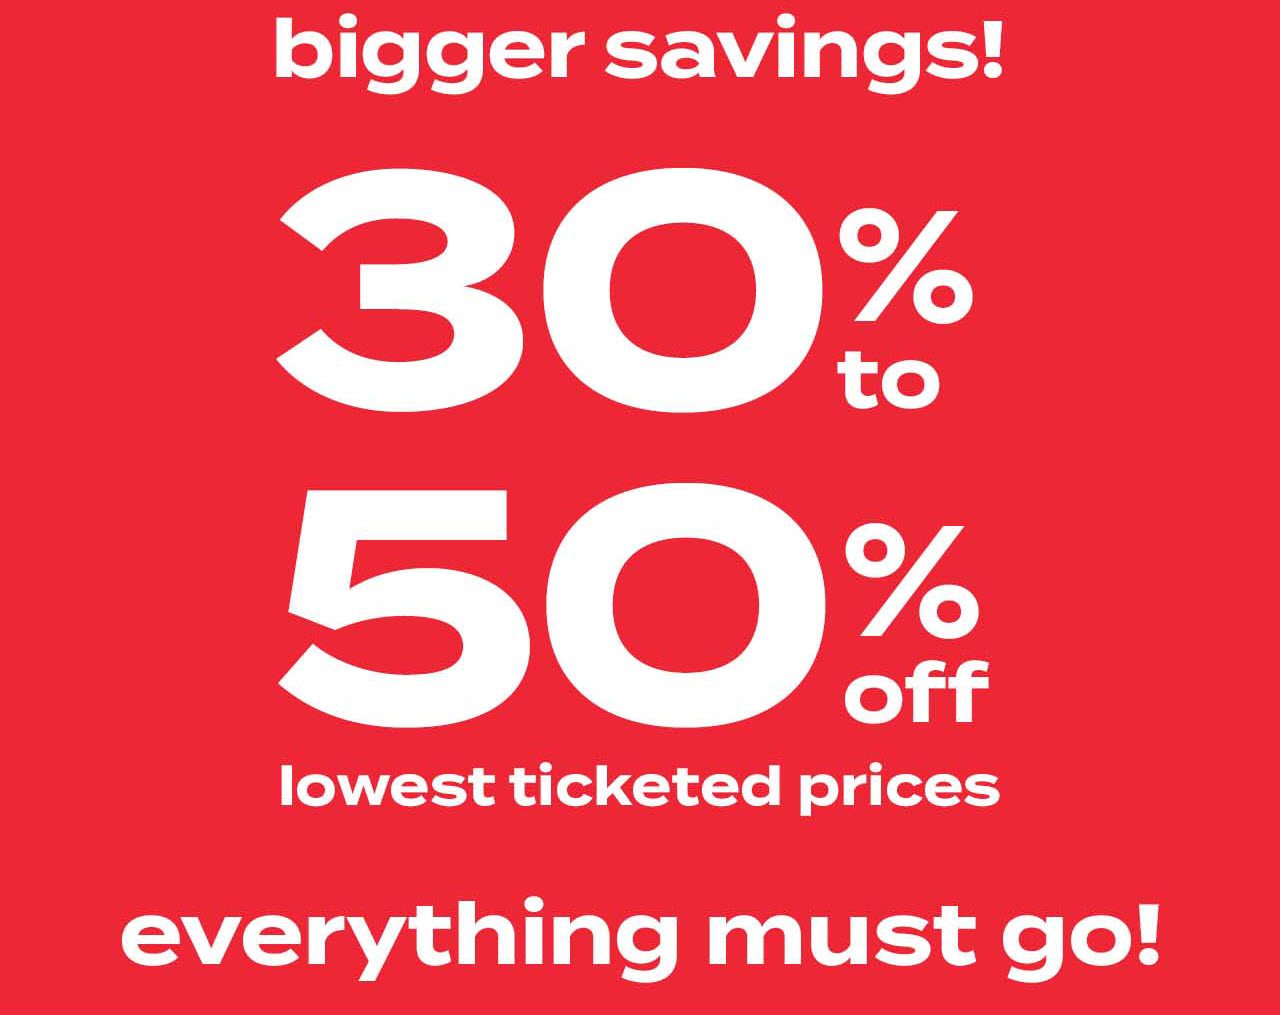 storewide savings! 30% to 50% off lowest ticketed prices - everything must go!